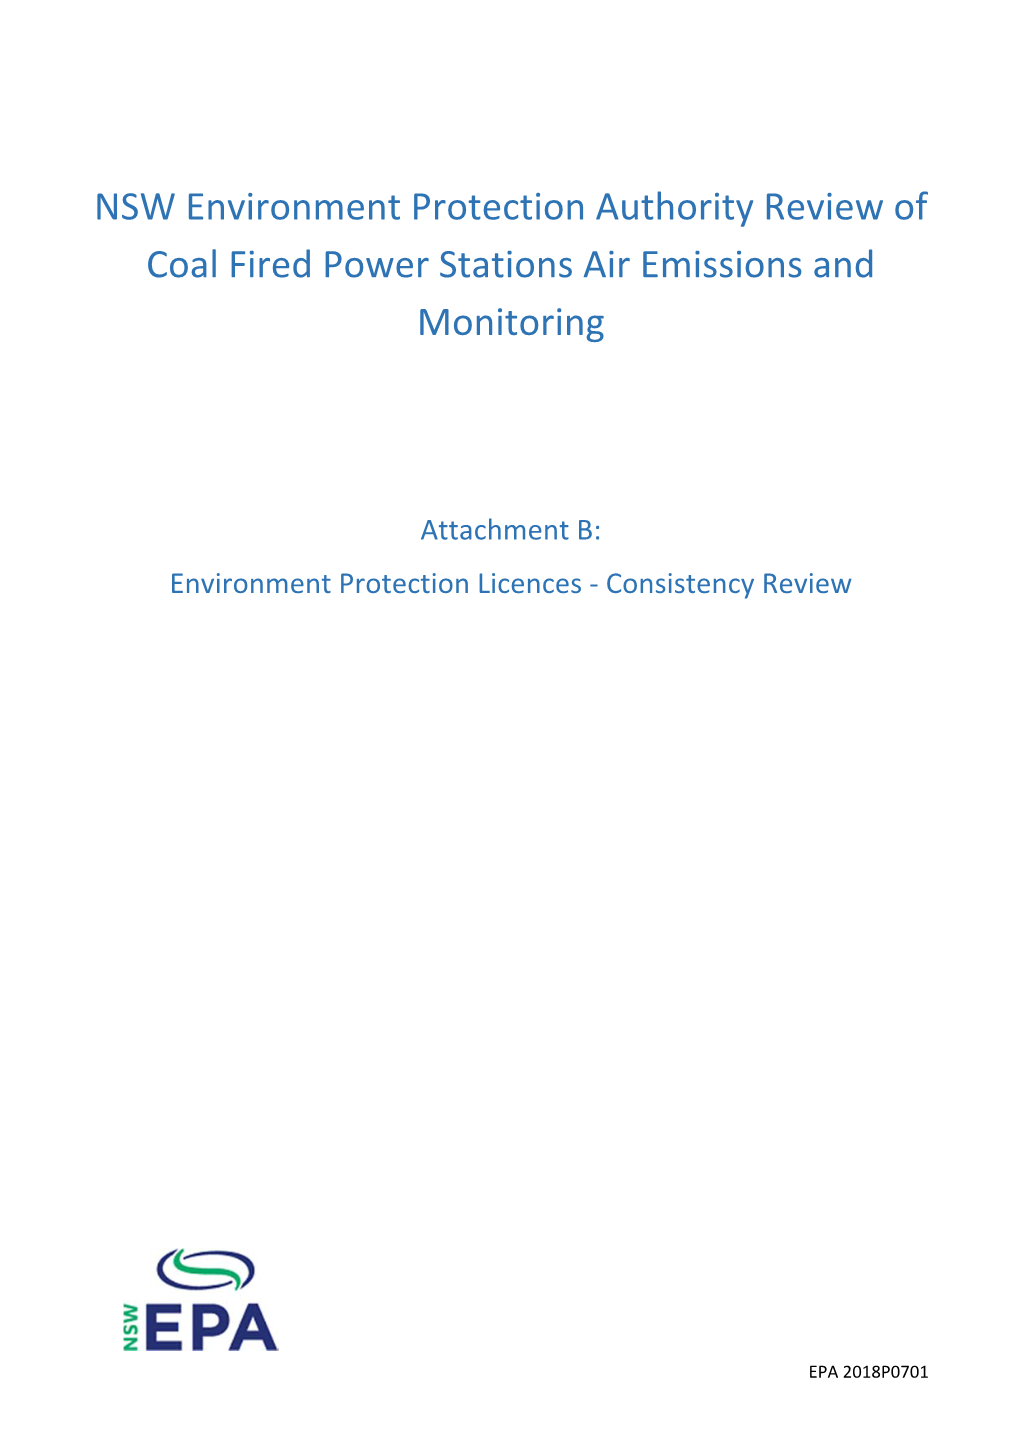 Review of Coal Fired Power Stations Air Emissions and Monitoring